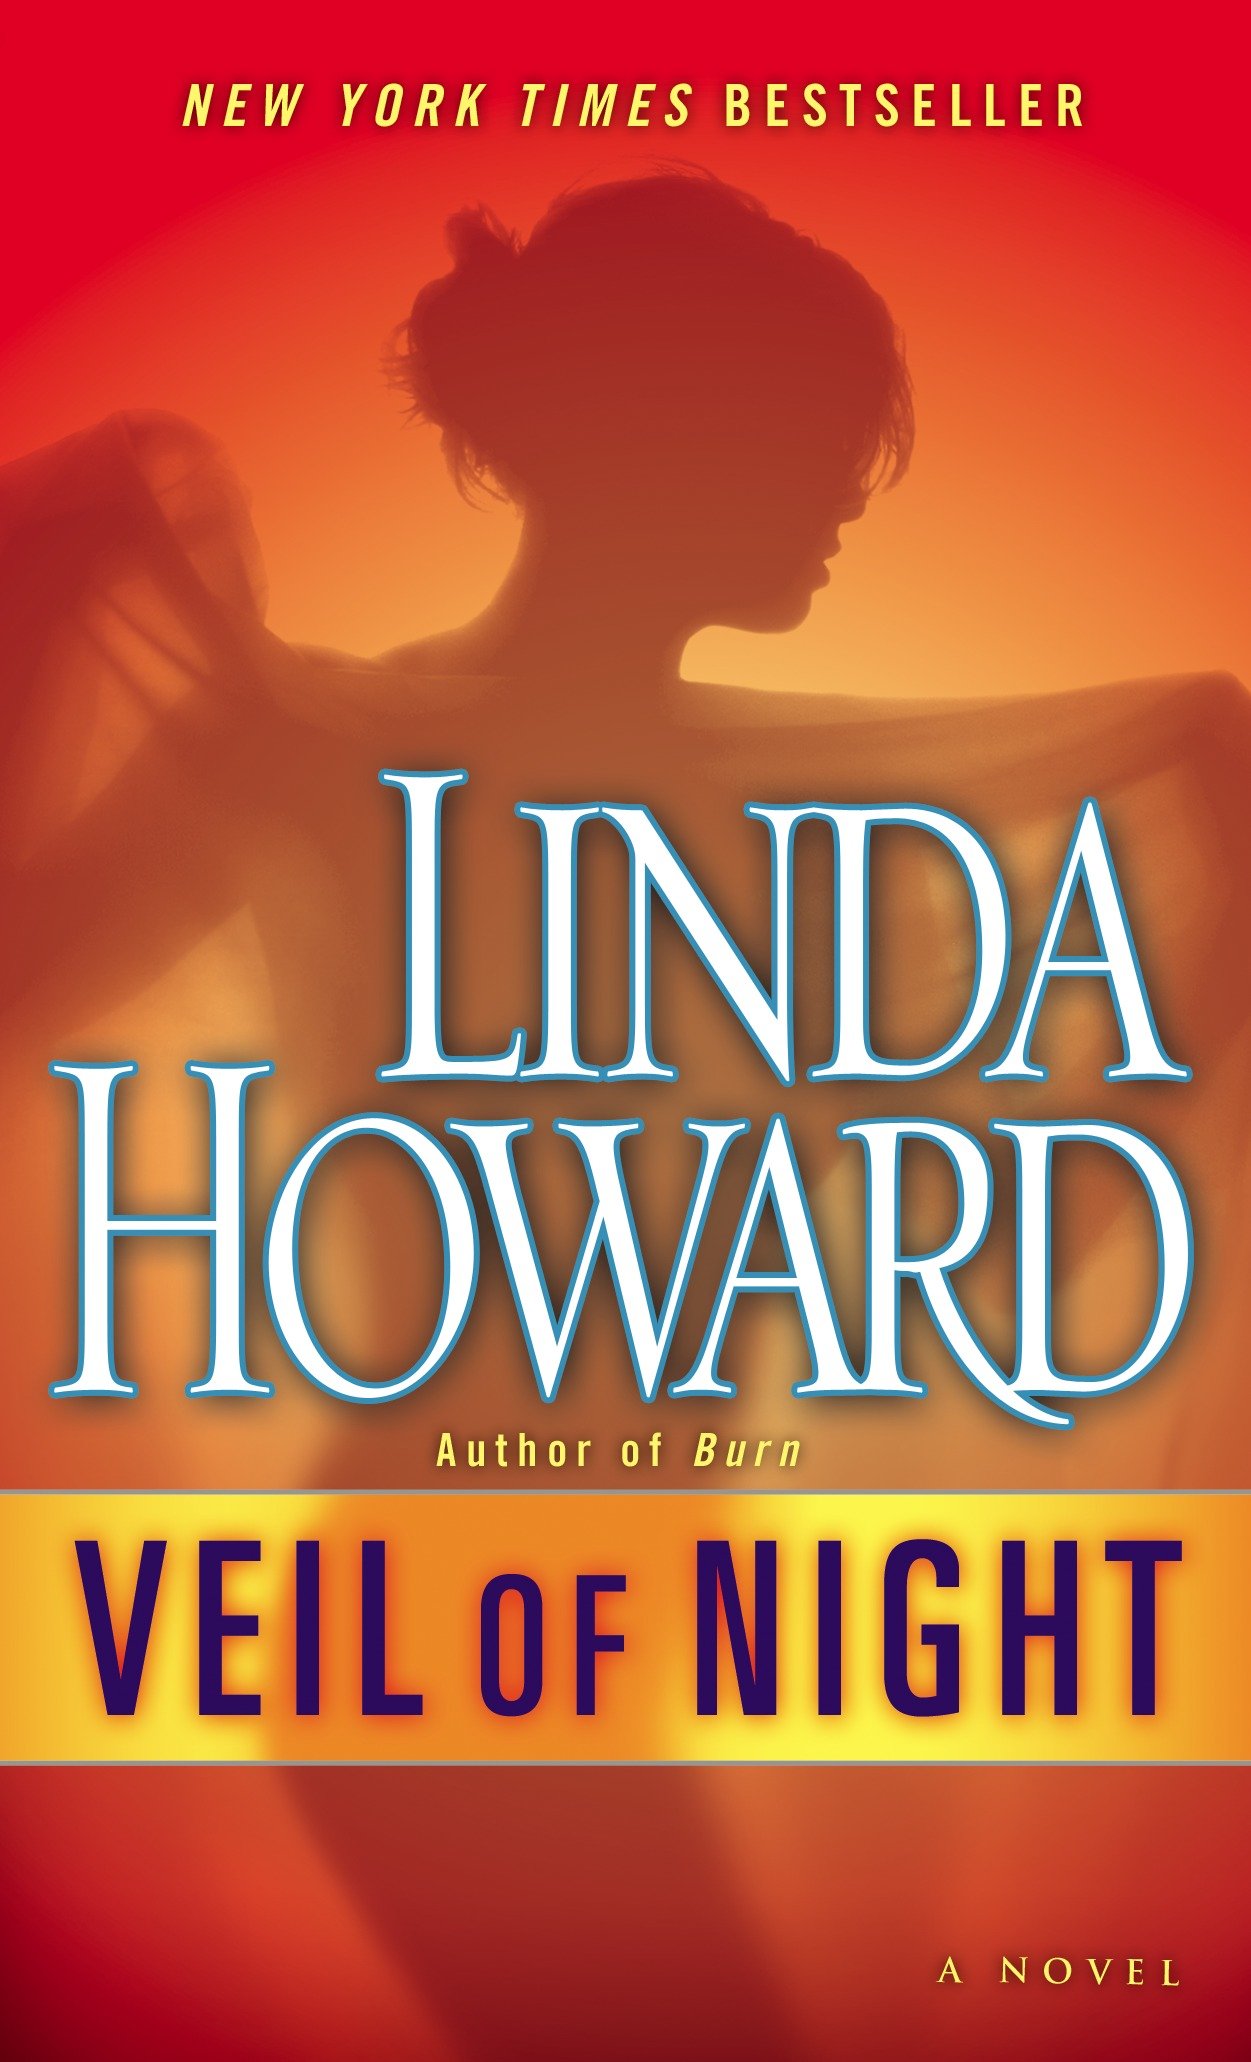 Veil of night cover image